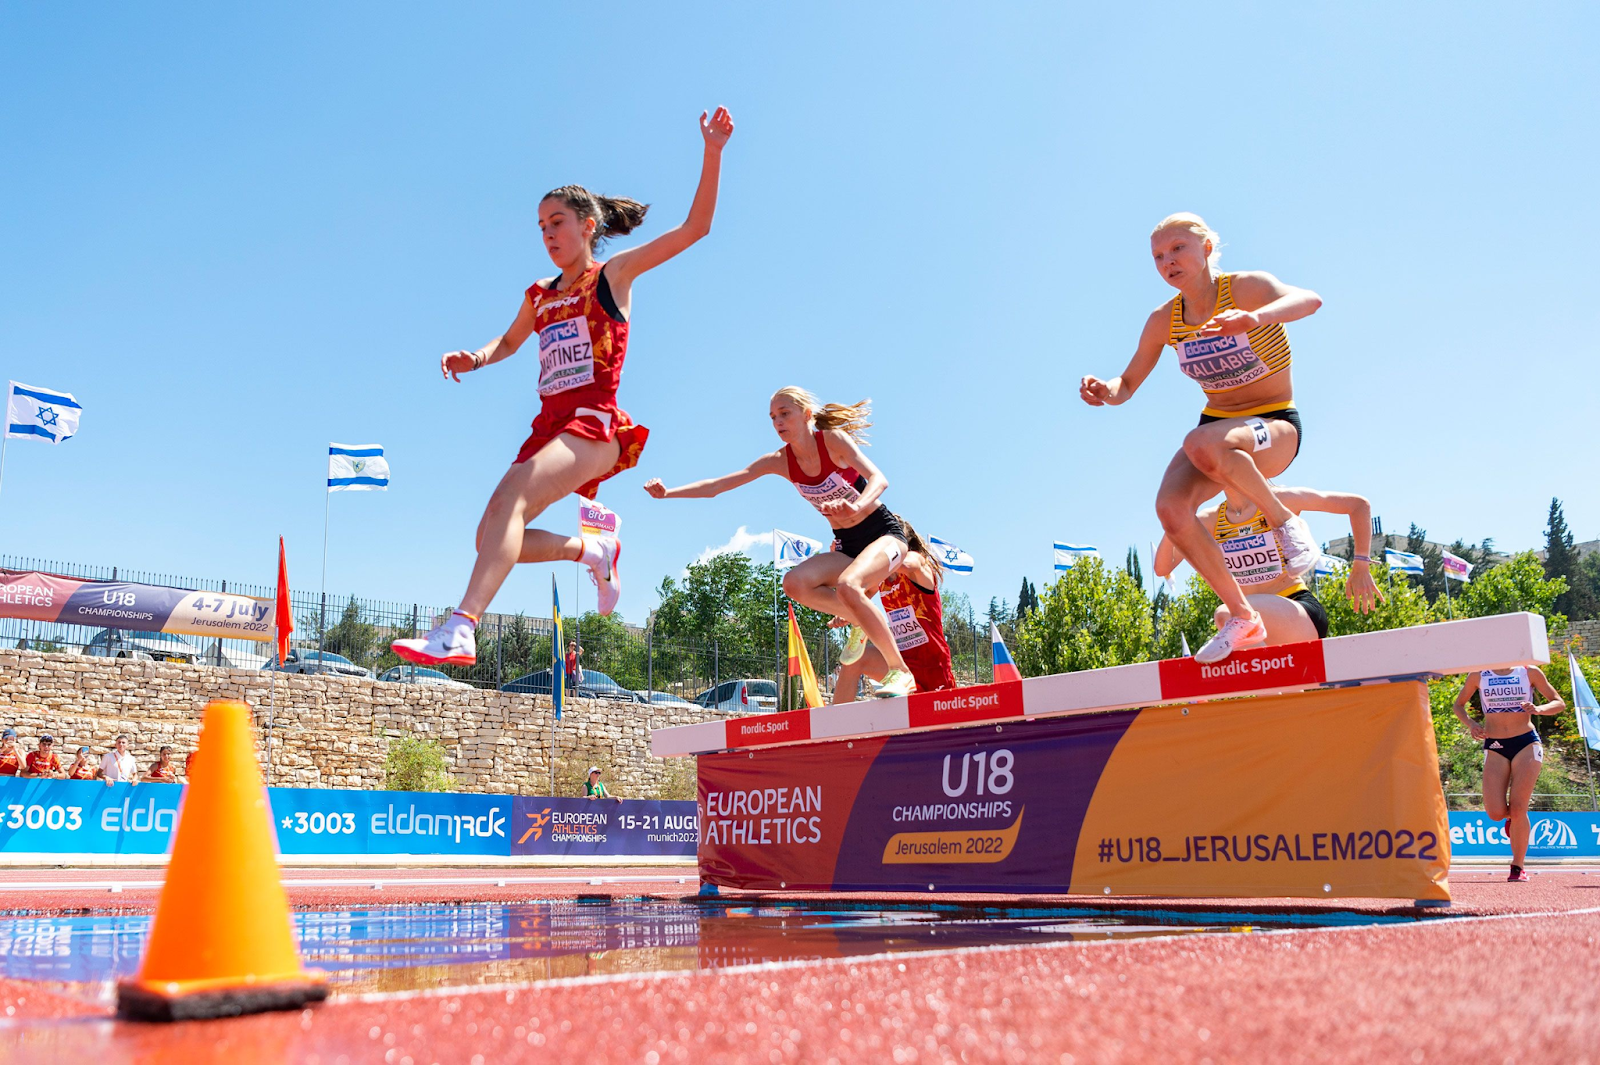 Parviainen sets European U18 javelin best in Jerusalem. Topi Parviainen's javelin throw of 84.52m was the best of the third day of the European Athletics U18 Championships (6)